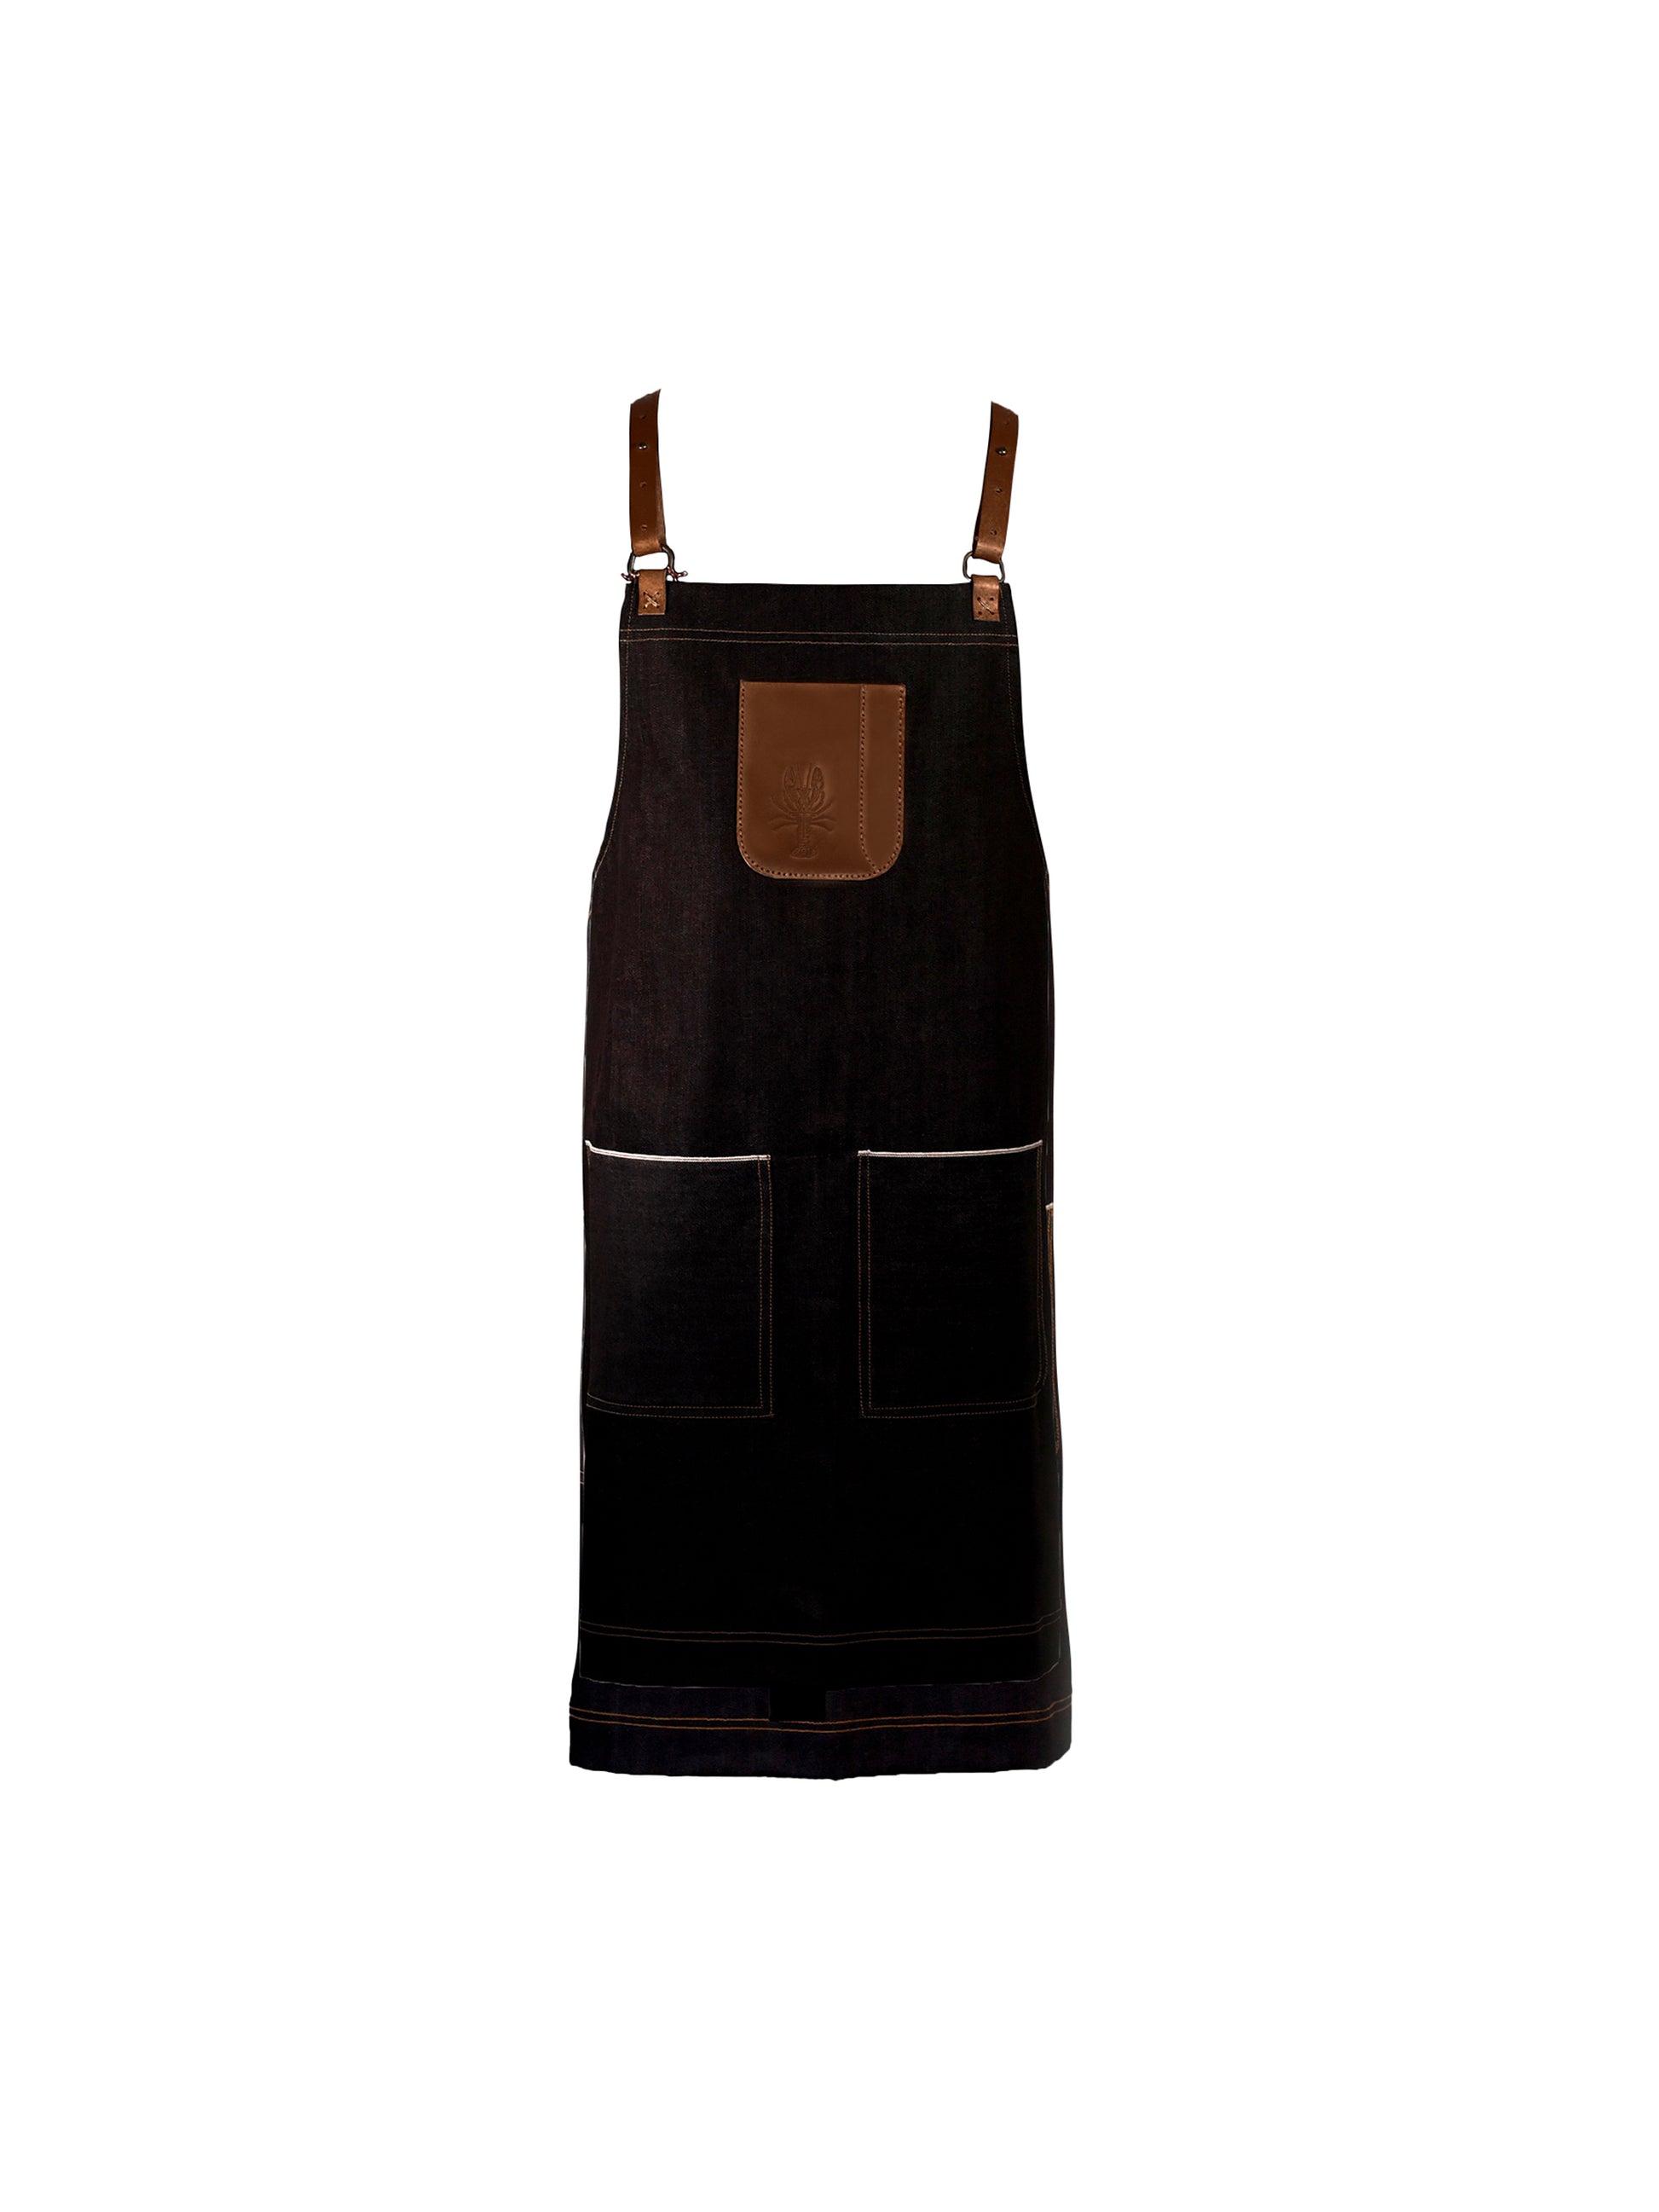 WT x Bramby Supply Co. Japanese Selvede Denim & Leather Apron Brown Leather Weston Table